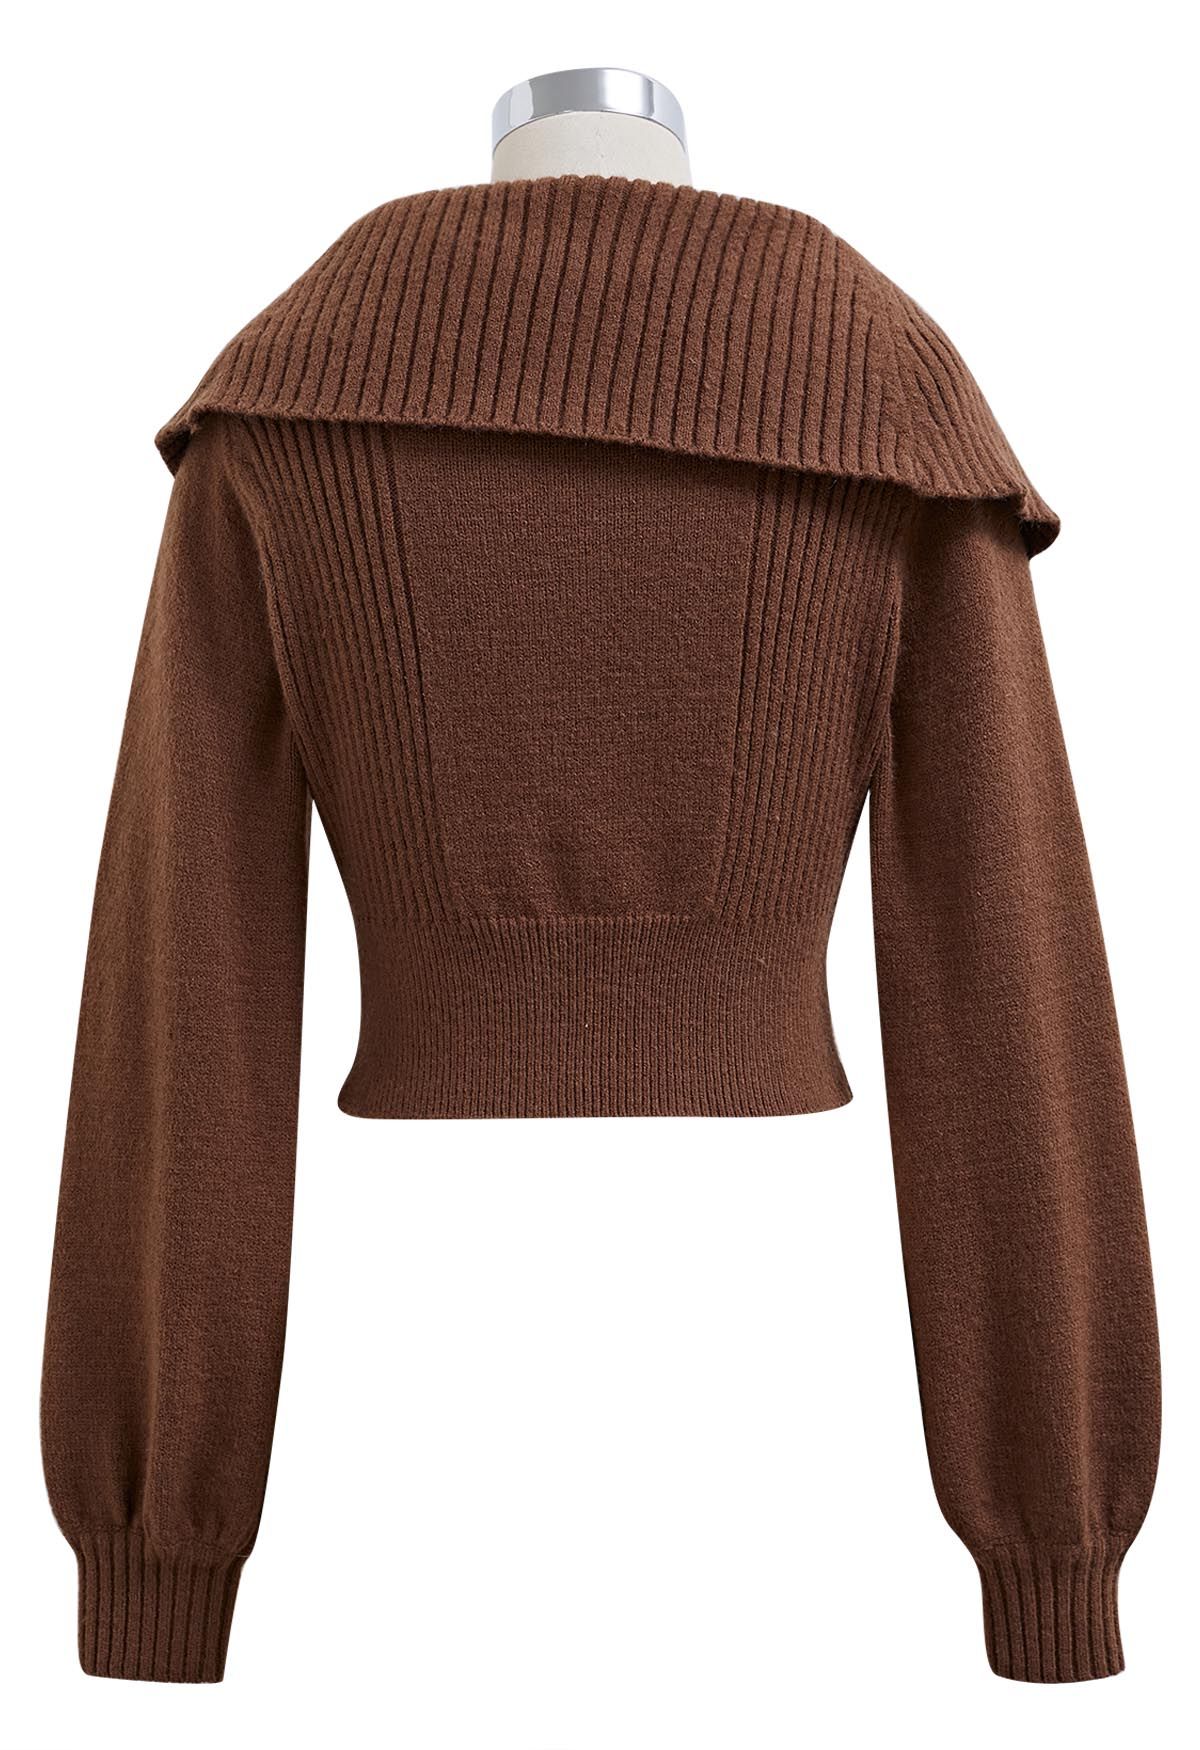 Flap Buttoned Collar Knit Crop Top in Brown